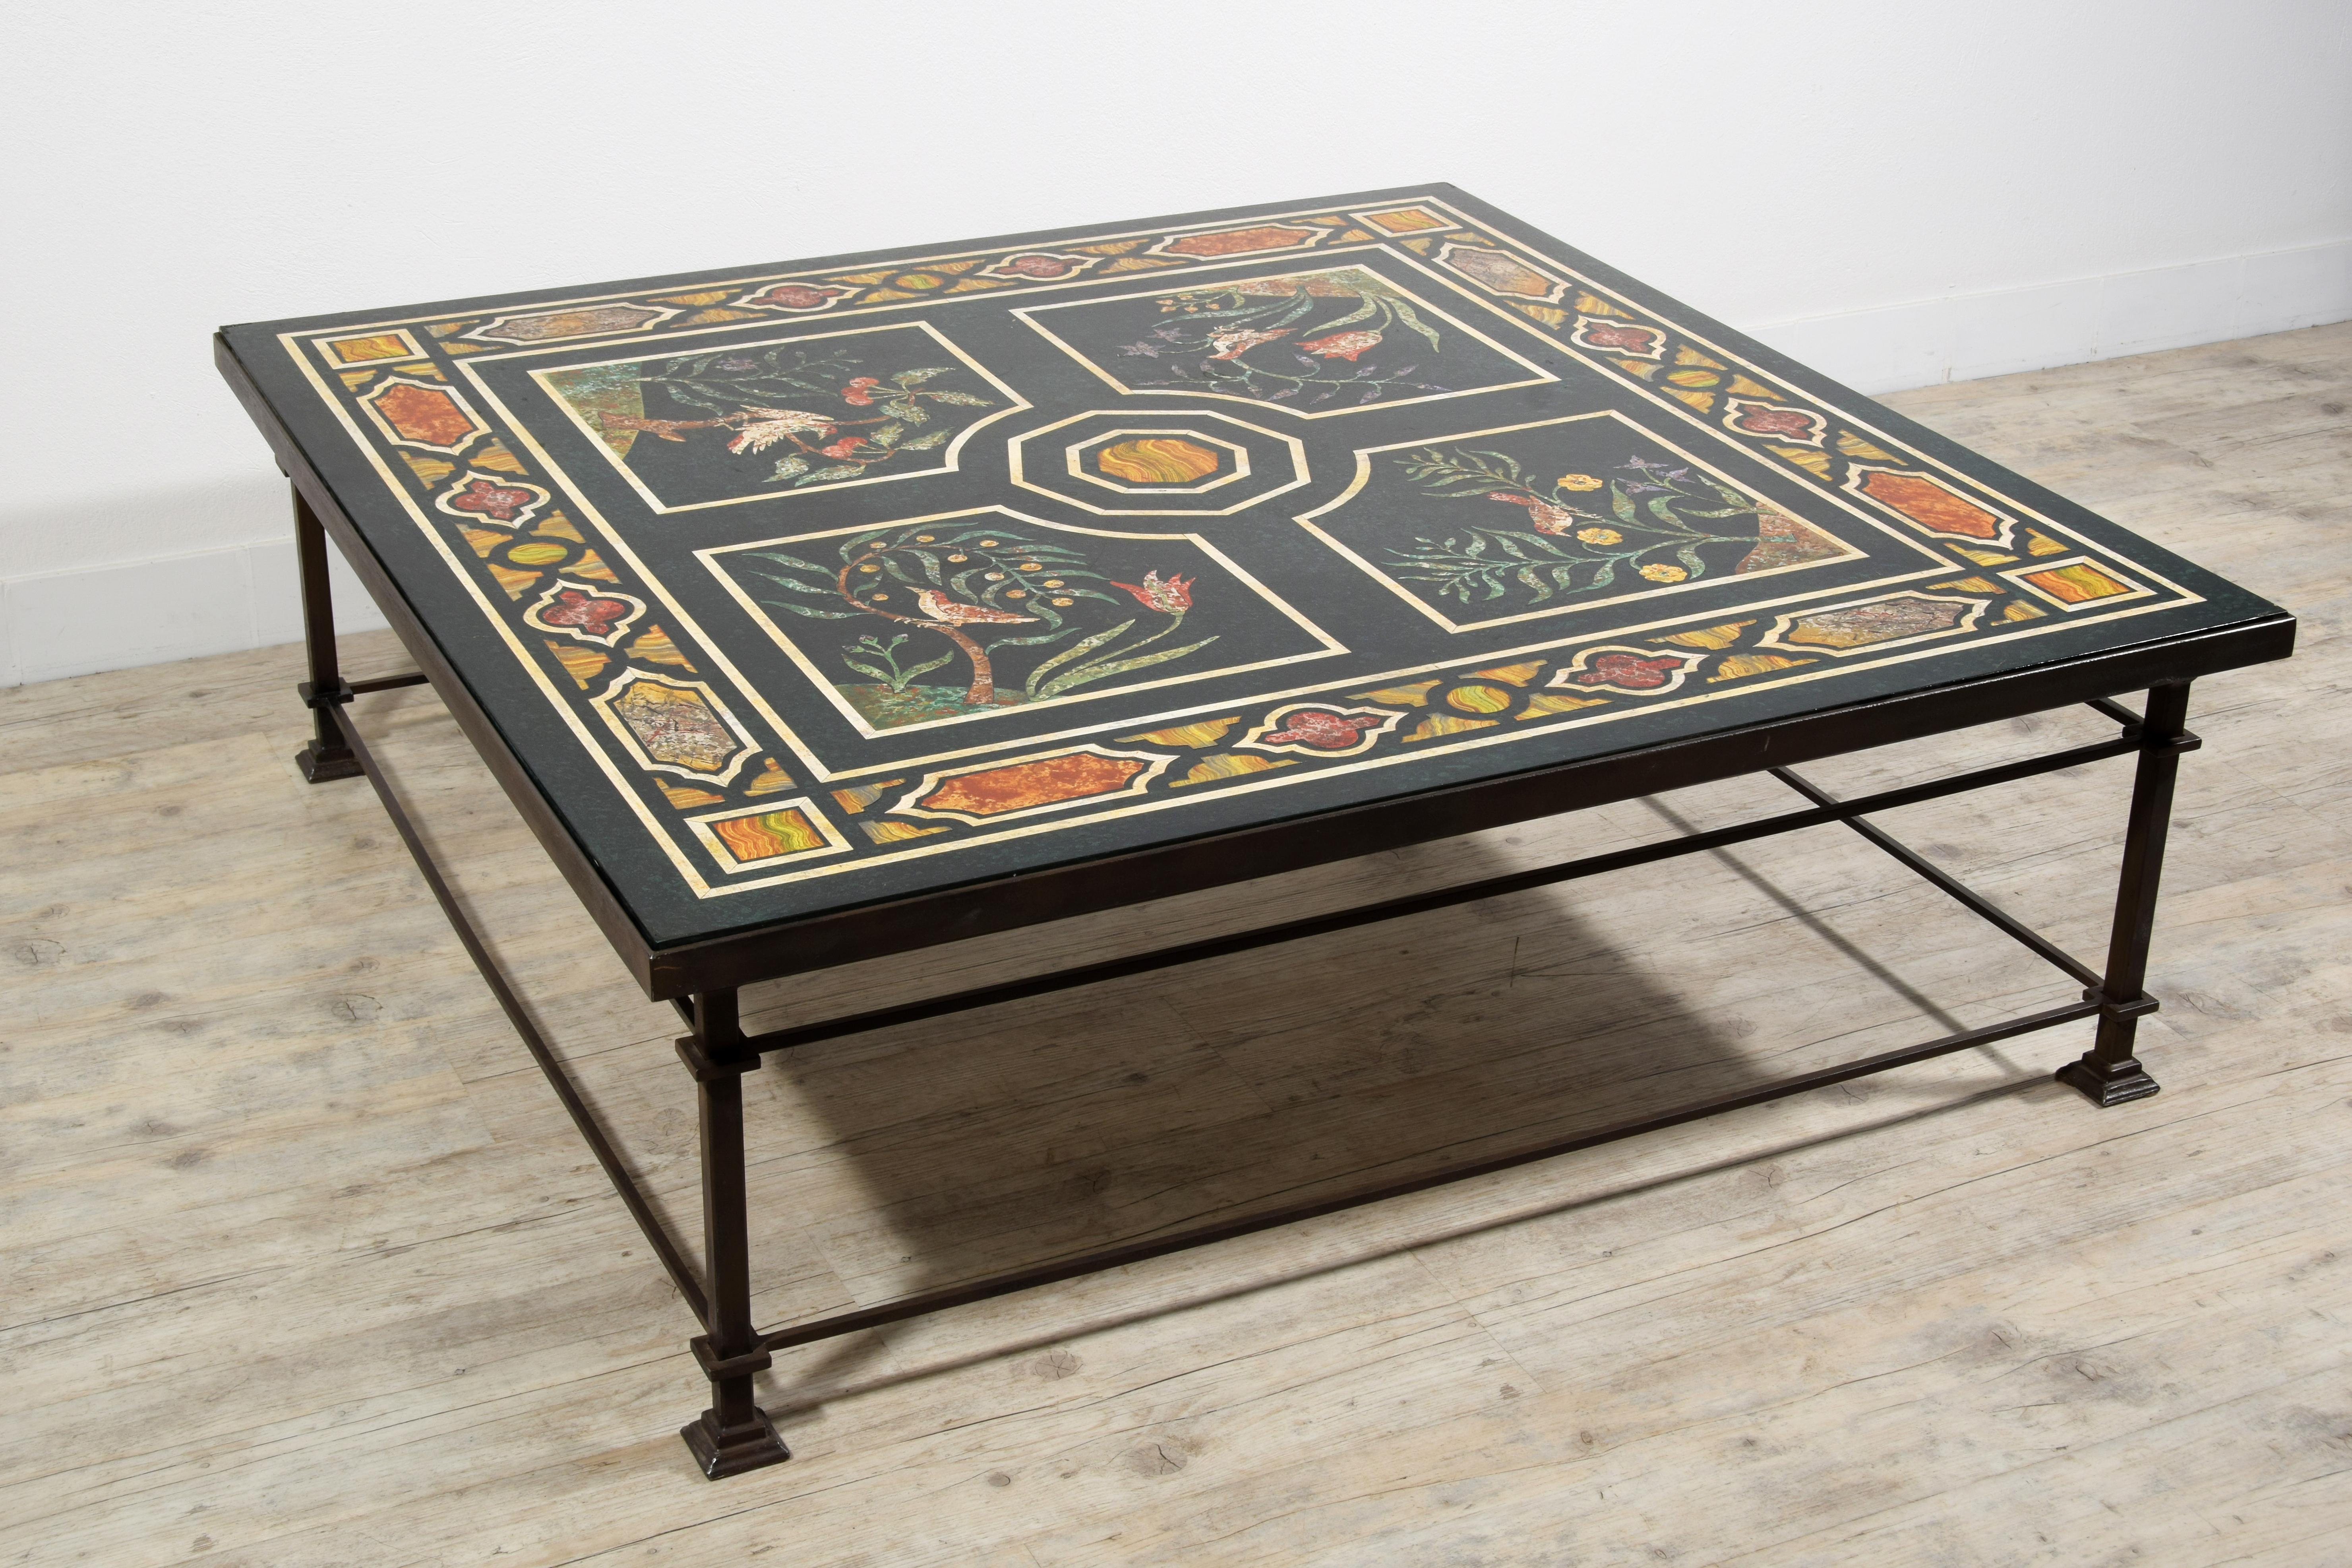 XXth Century, Tuscan Large Square Coffee Table with Lacquered Wood 
Measurements: cm 136,5 x 136,5 x H 45,5 
Top thickness 4 cm

This table was made around the fifties of the twentieth century. The structure is in wrought iron with the four legs